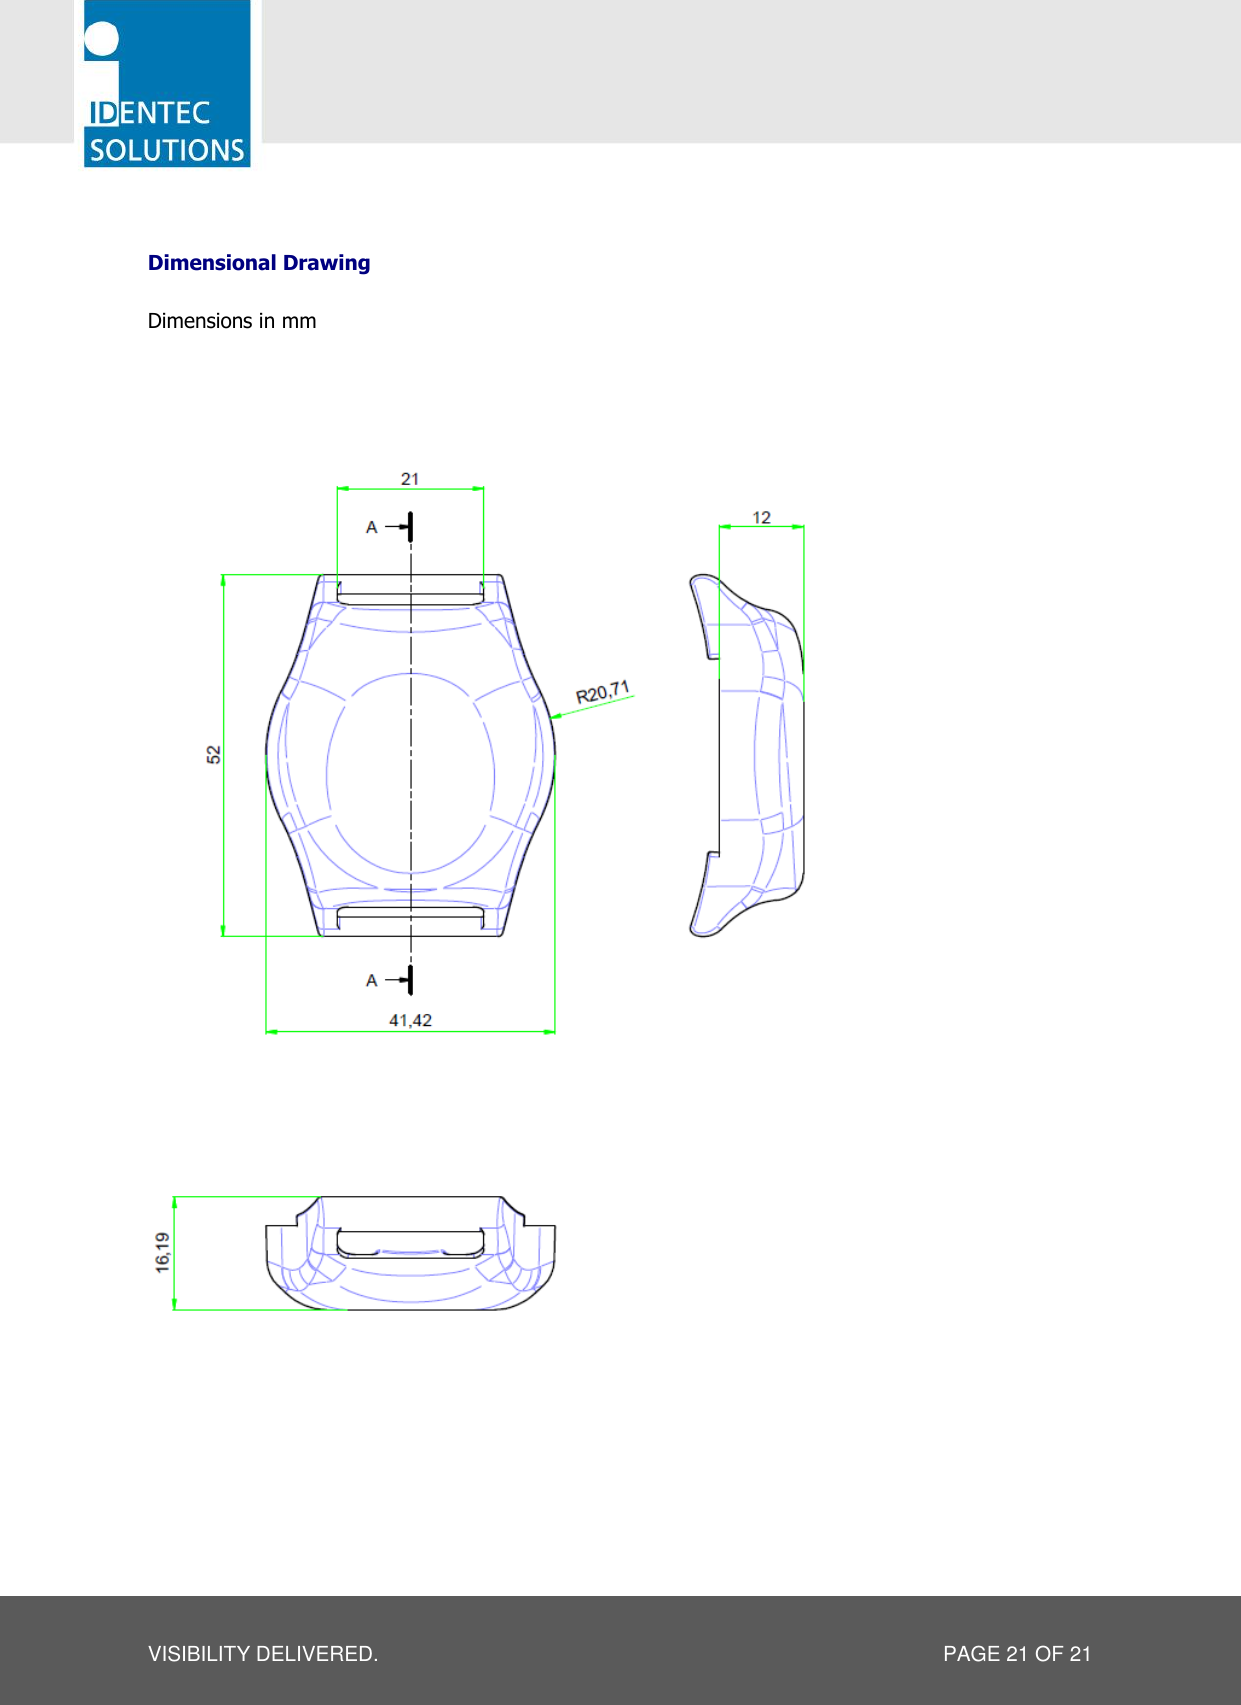   VISIBILITY DELIVERED.  PAGE 21 OF 21  Dimensional Drawing  Dimensions in mm               